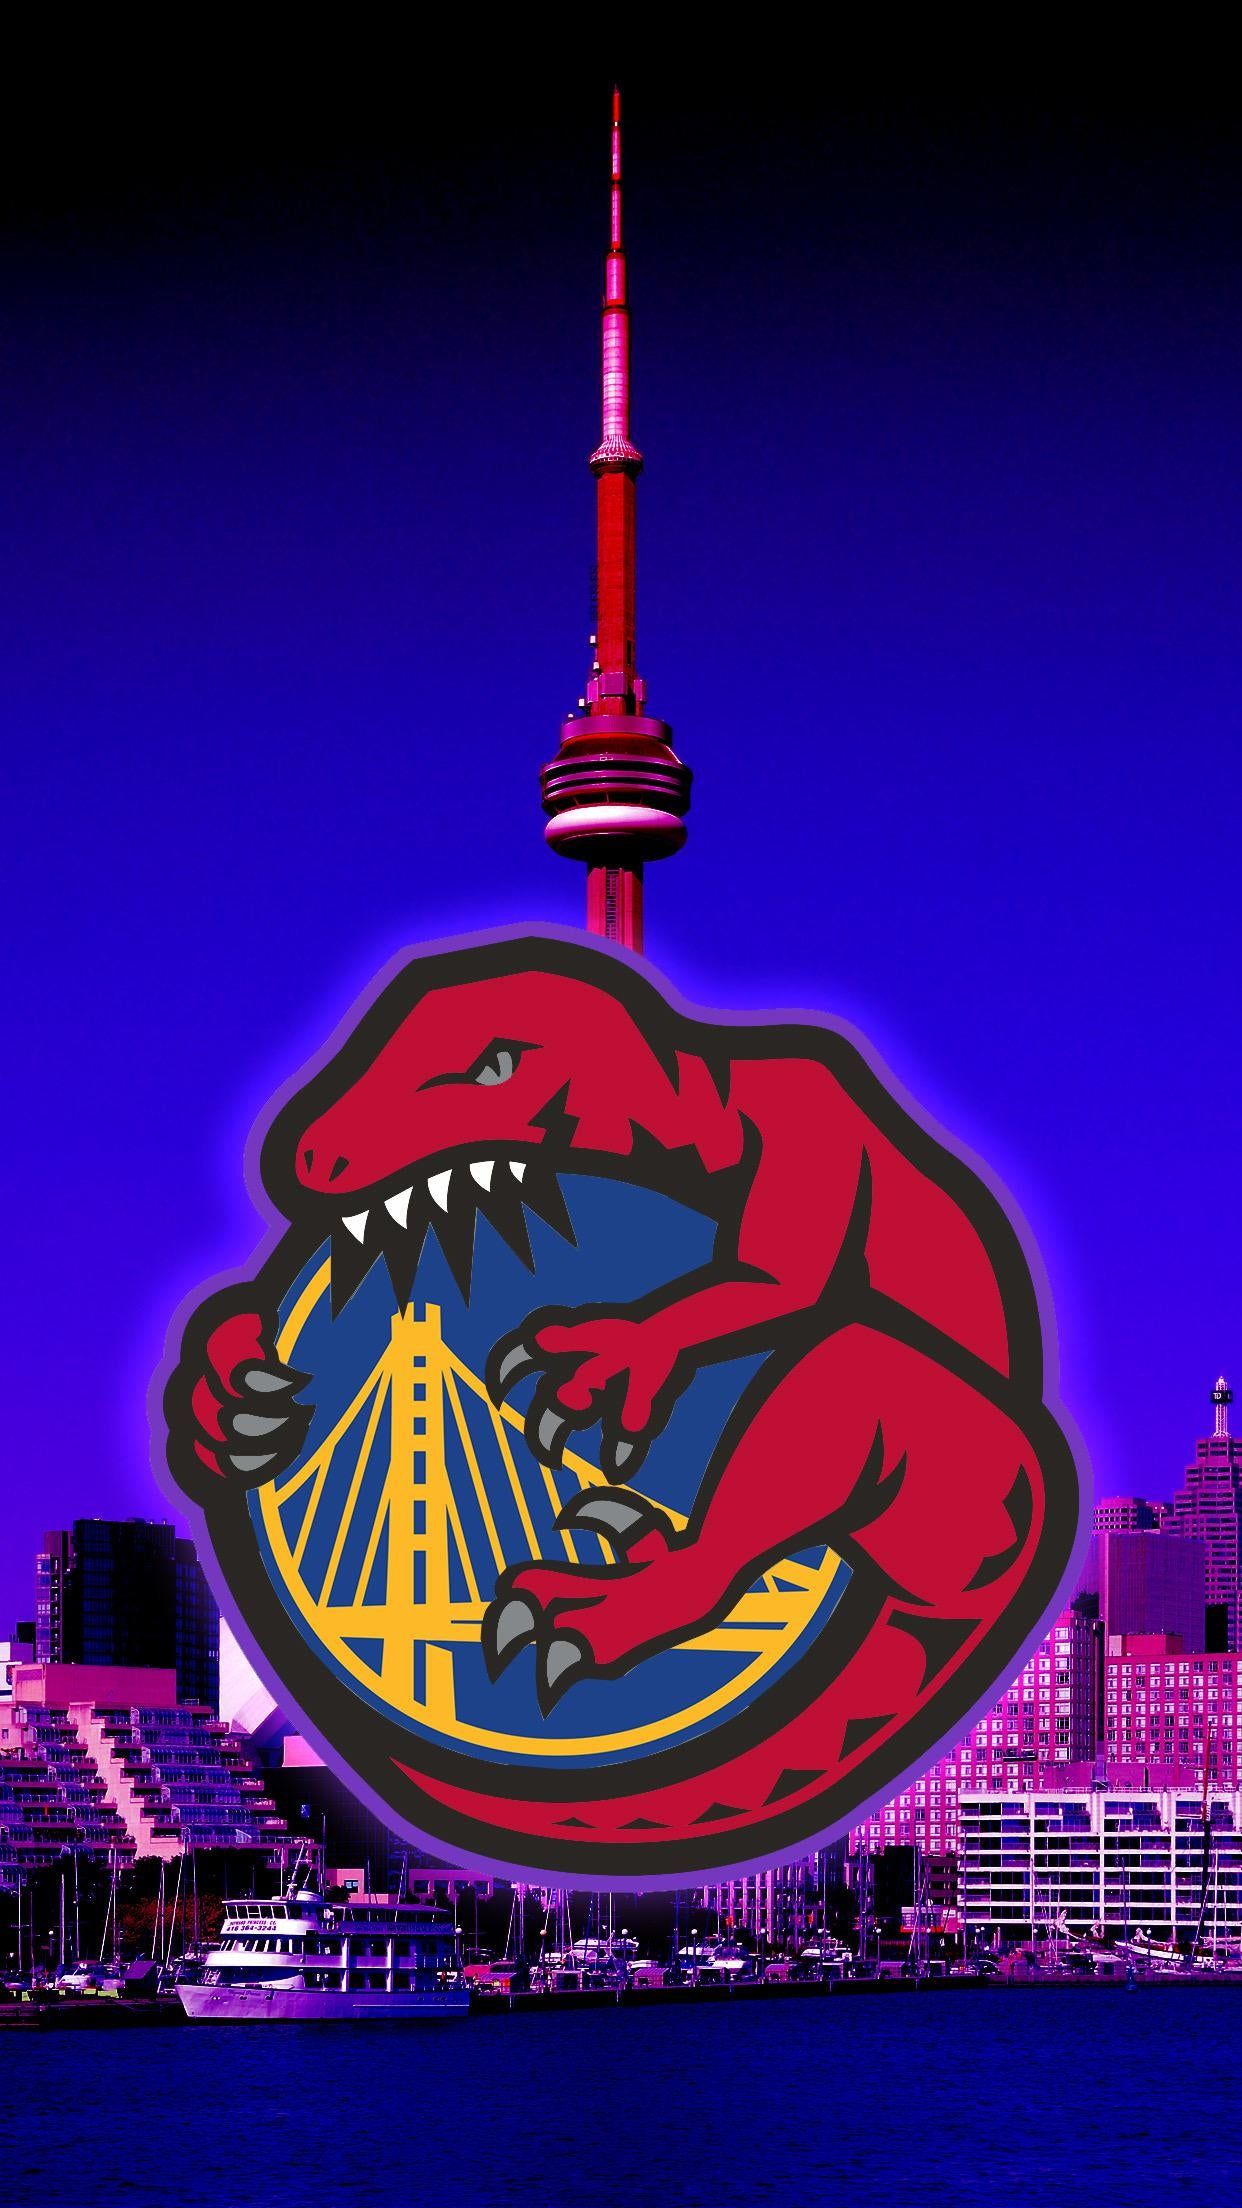 Created some wallpaper in celebration. Made for iPhone 8plus.: torontoraptors